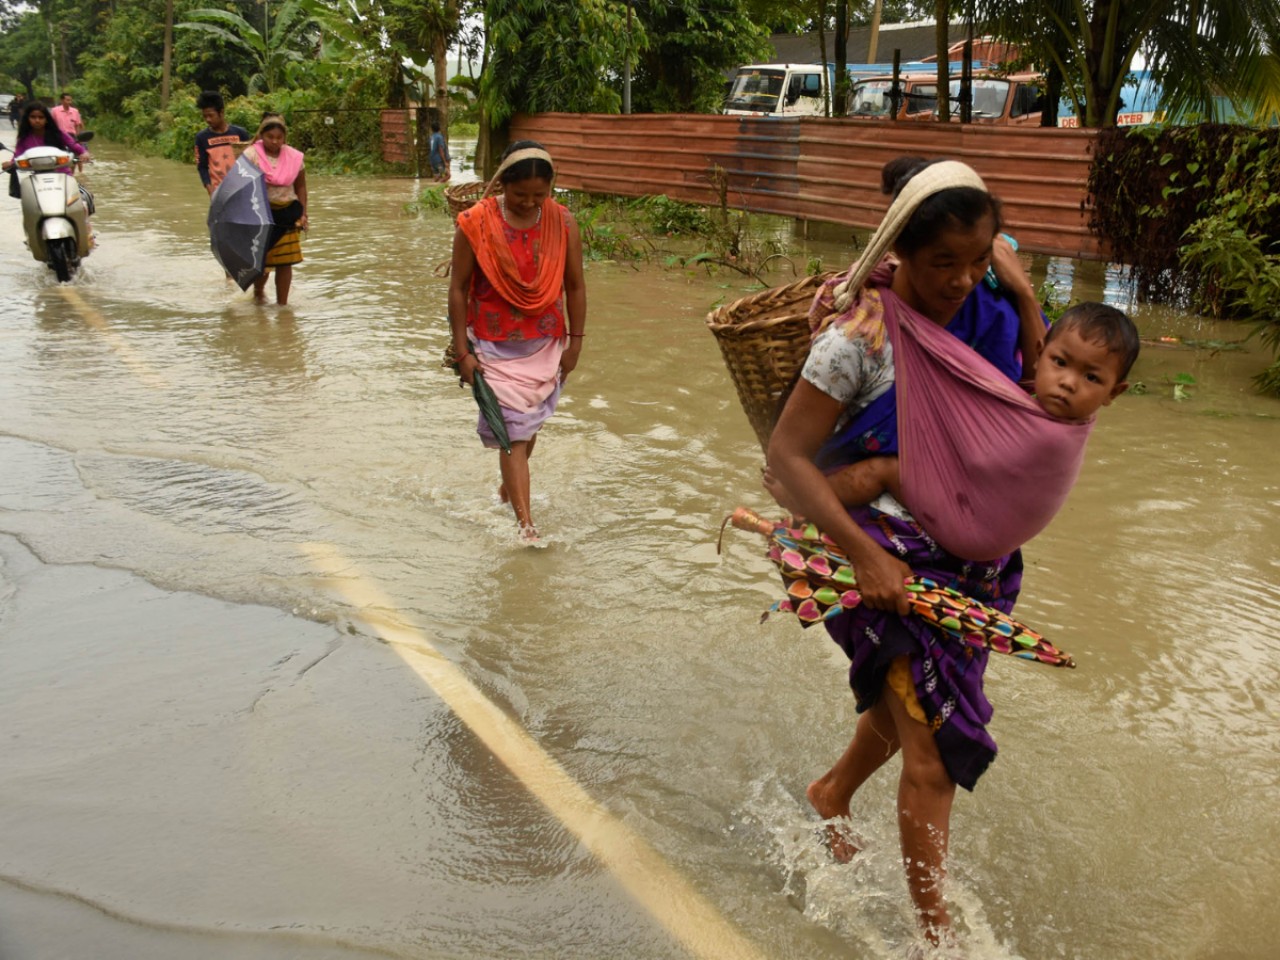 North-east India struggles with massive floods